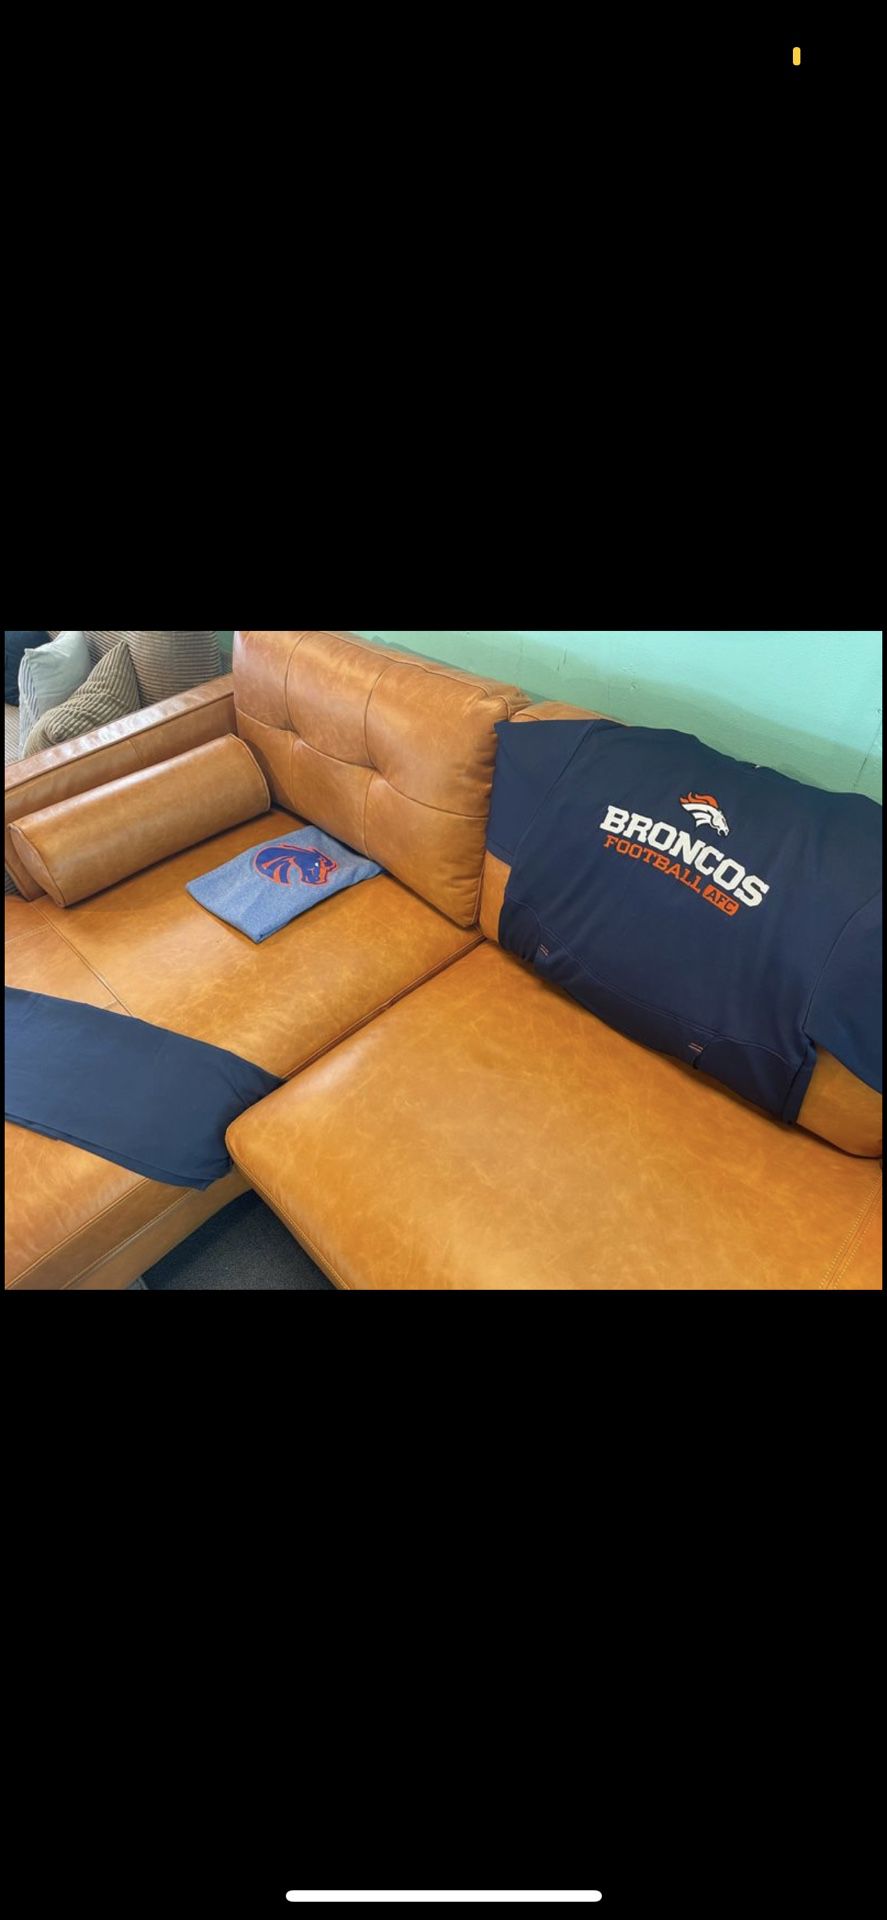 Root for the Broncos with a Beautiful caramel color leather Sectional 🧡💙🧡💙🧡💙